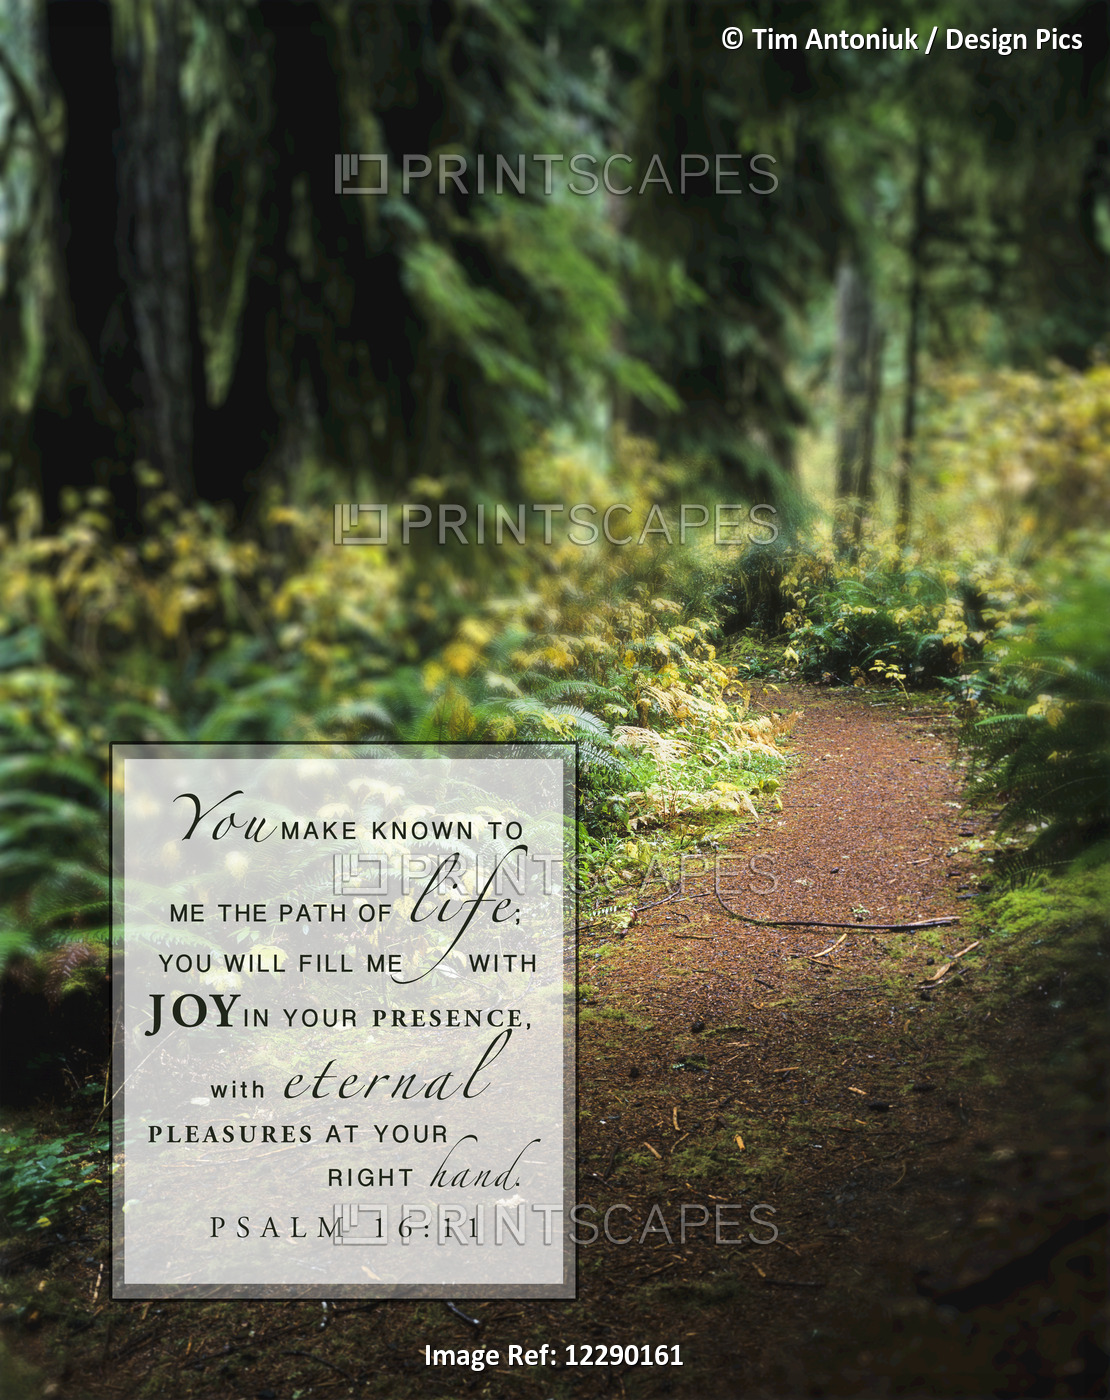 Image Of A Trail Going Through A Lush Forest And Scripture From Psalm 16:11